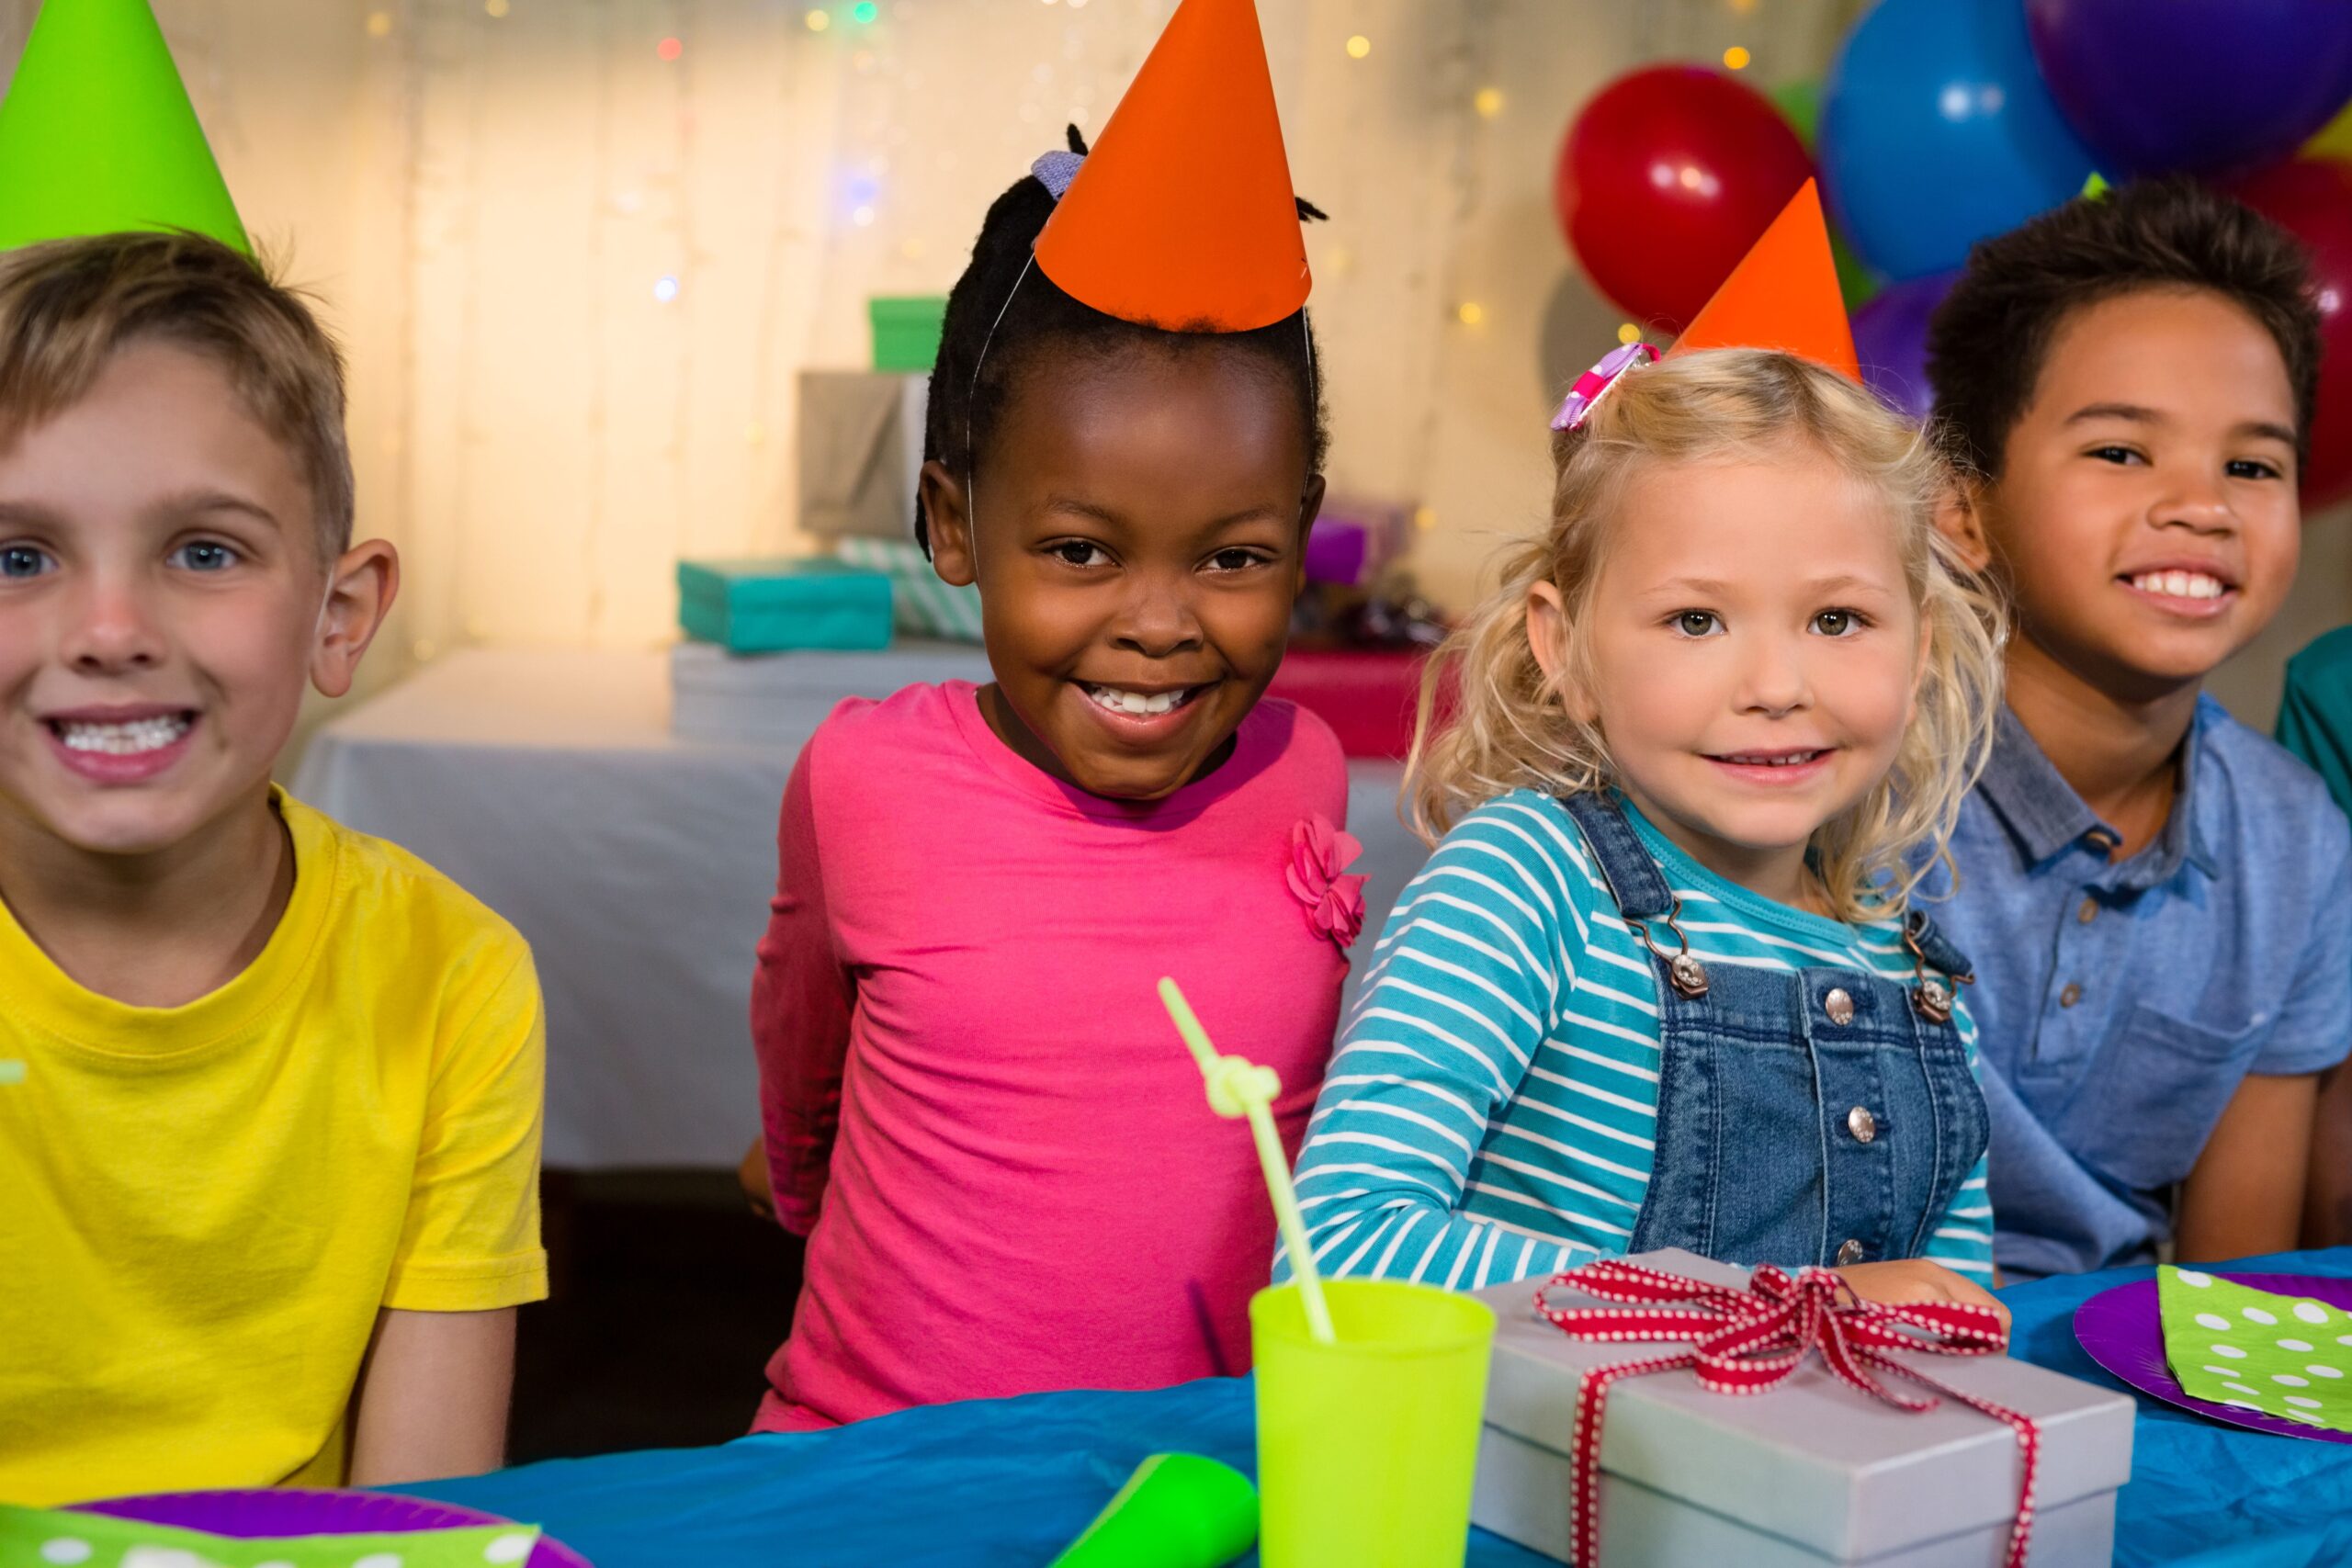 Kids smile at a birthday party